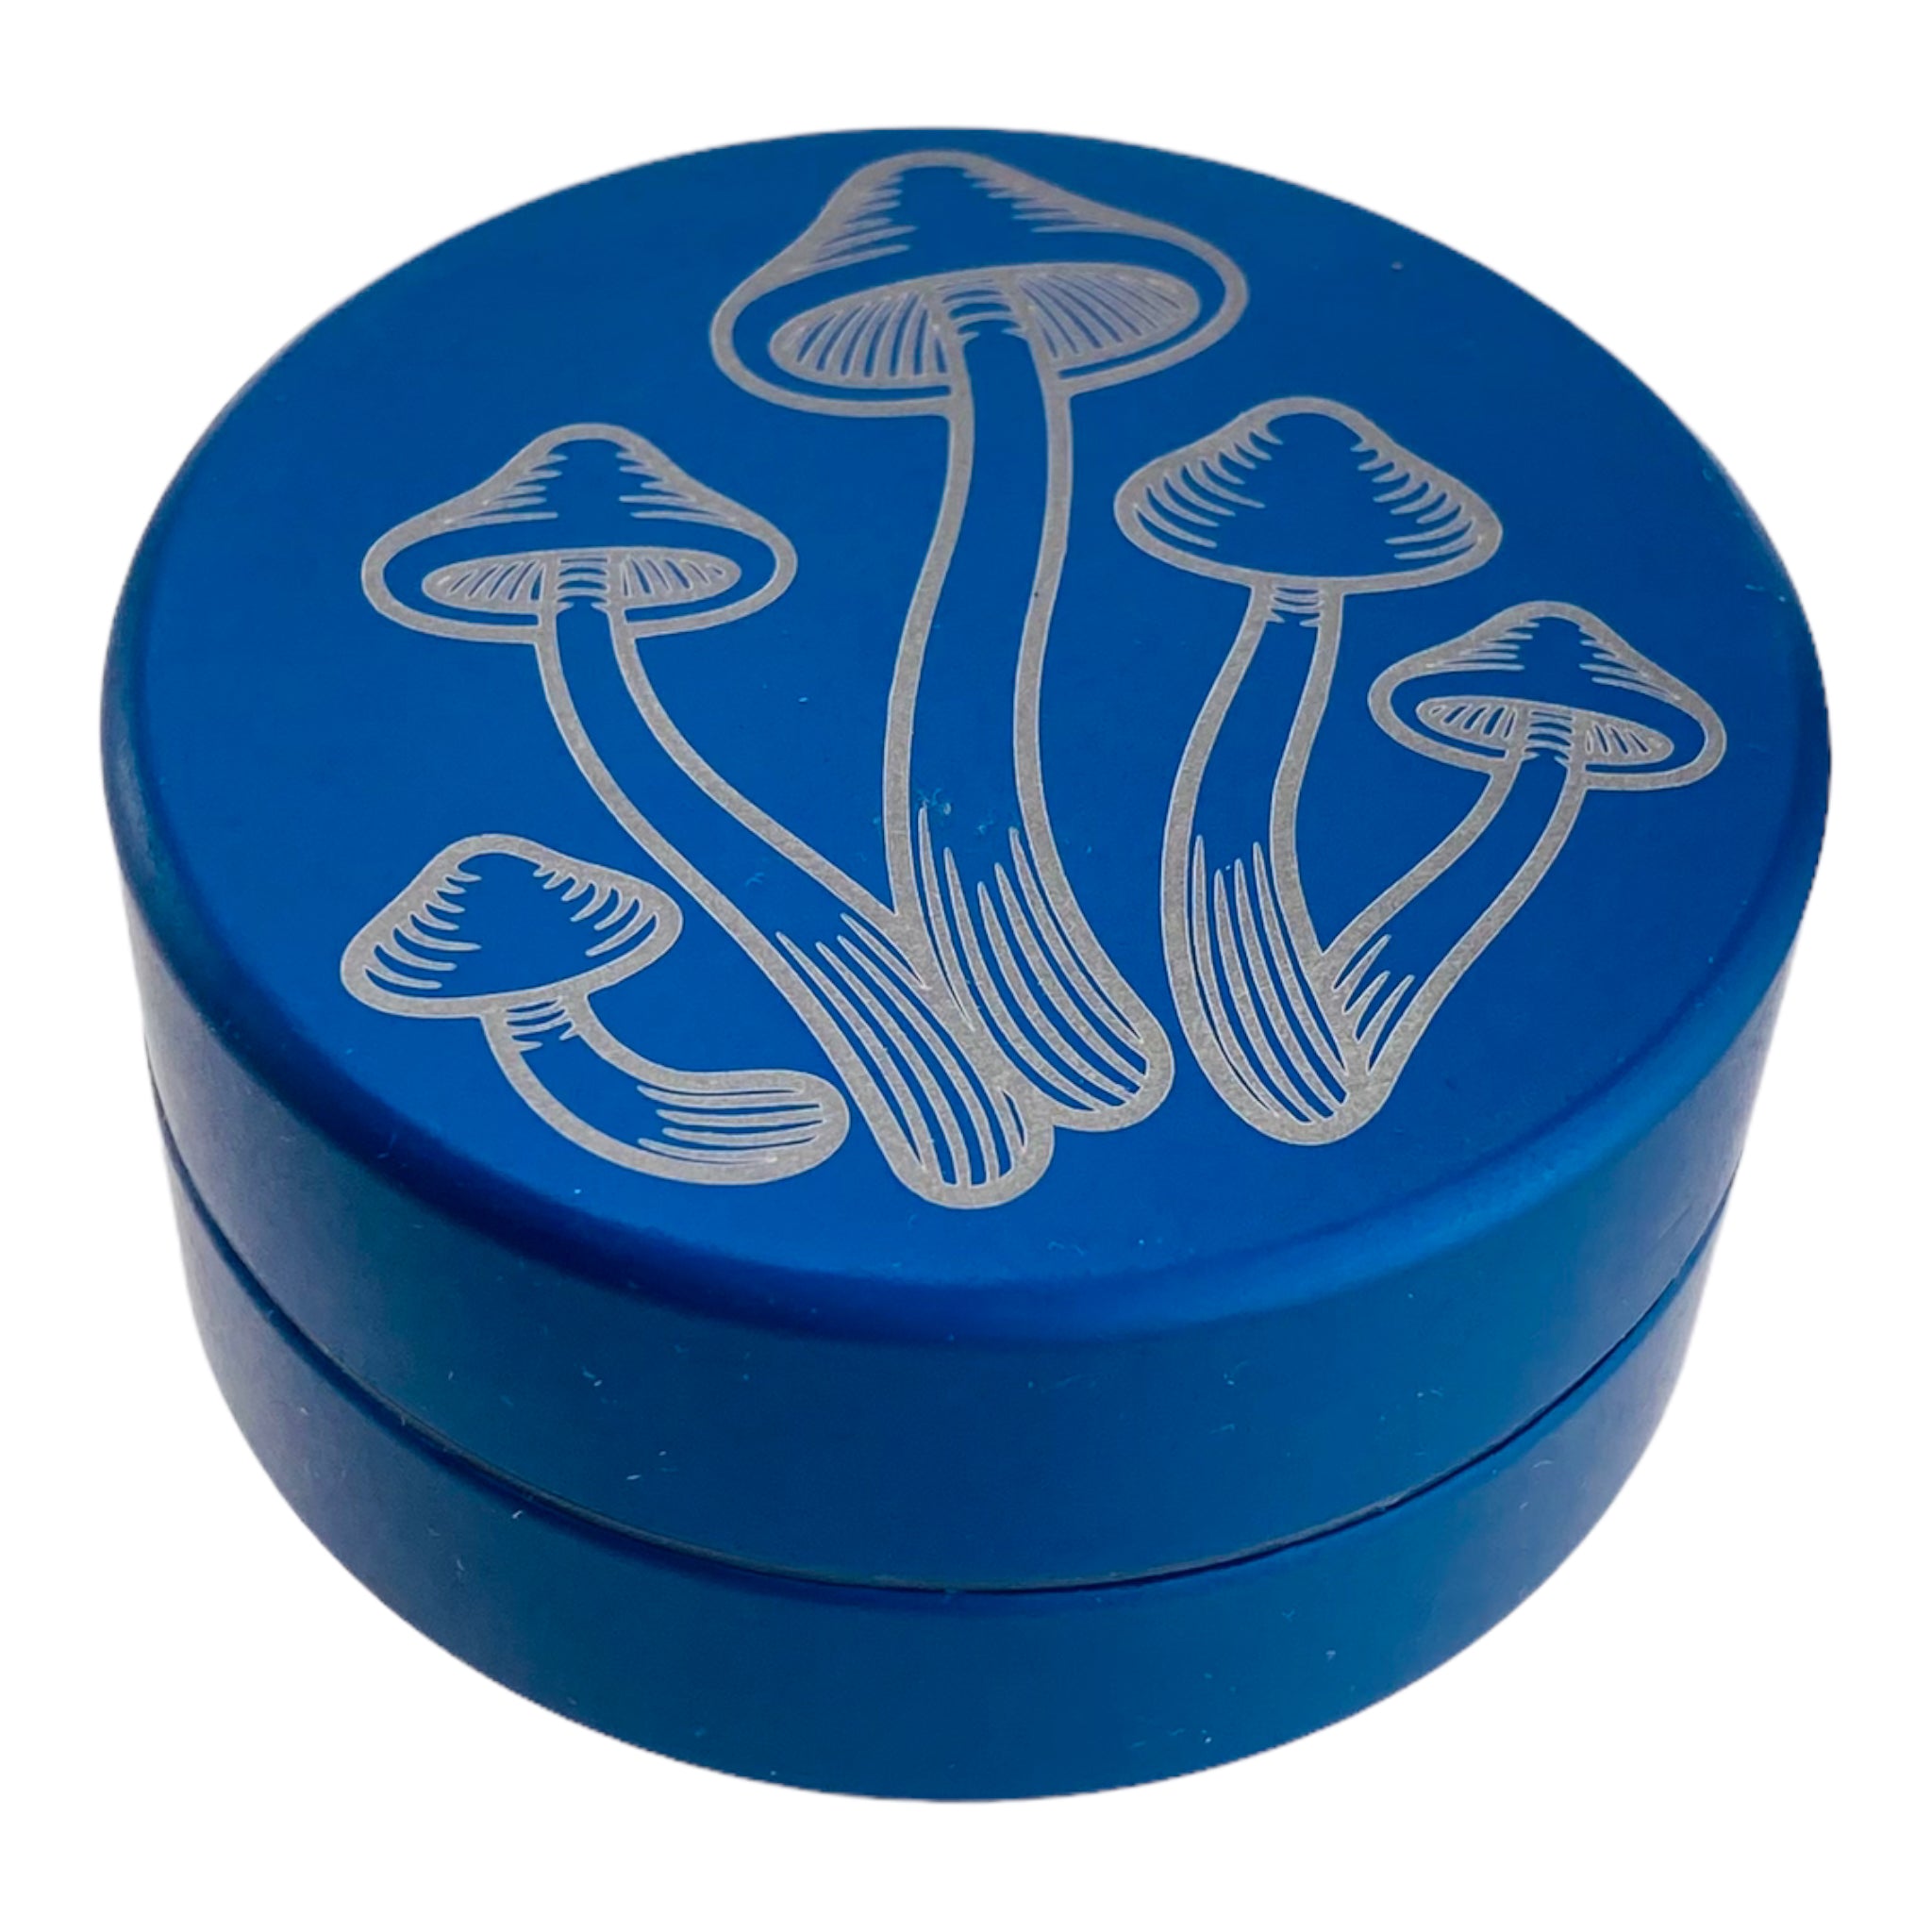 Tahoe Grinders - Blue Anodized Aluminum Large Two Piece Herb Grinder With Cordycep Mushrooms